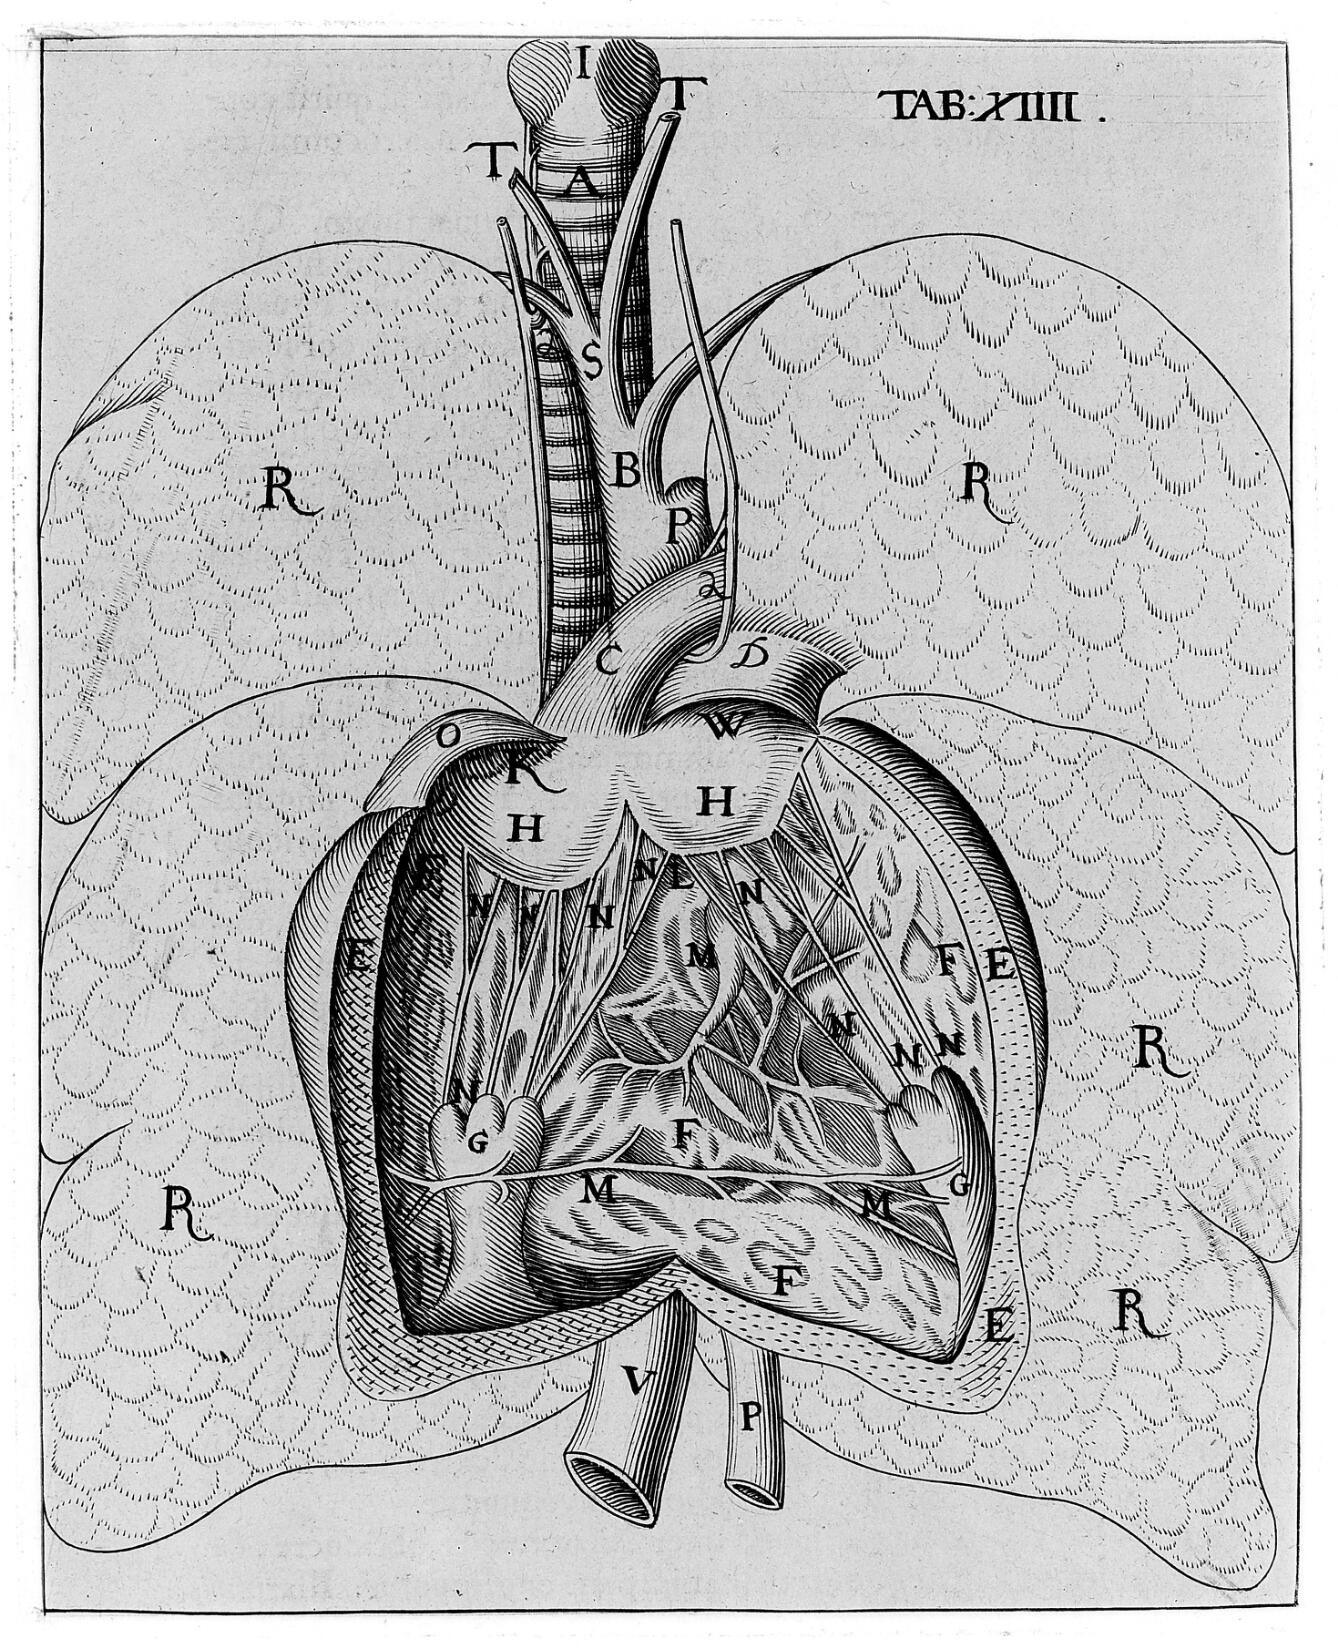 A 17th century page from a black and white anatomical book showing a diagram of the heart with its various parts labelled.